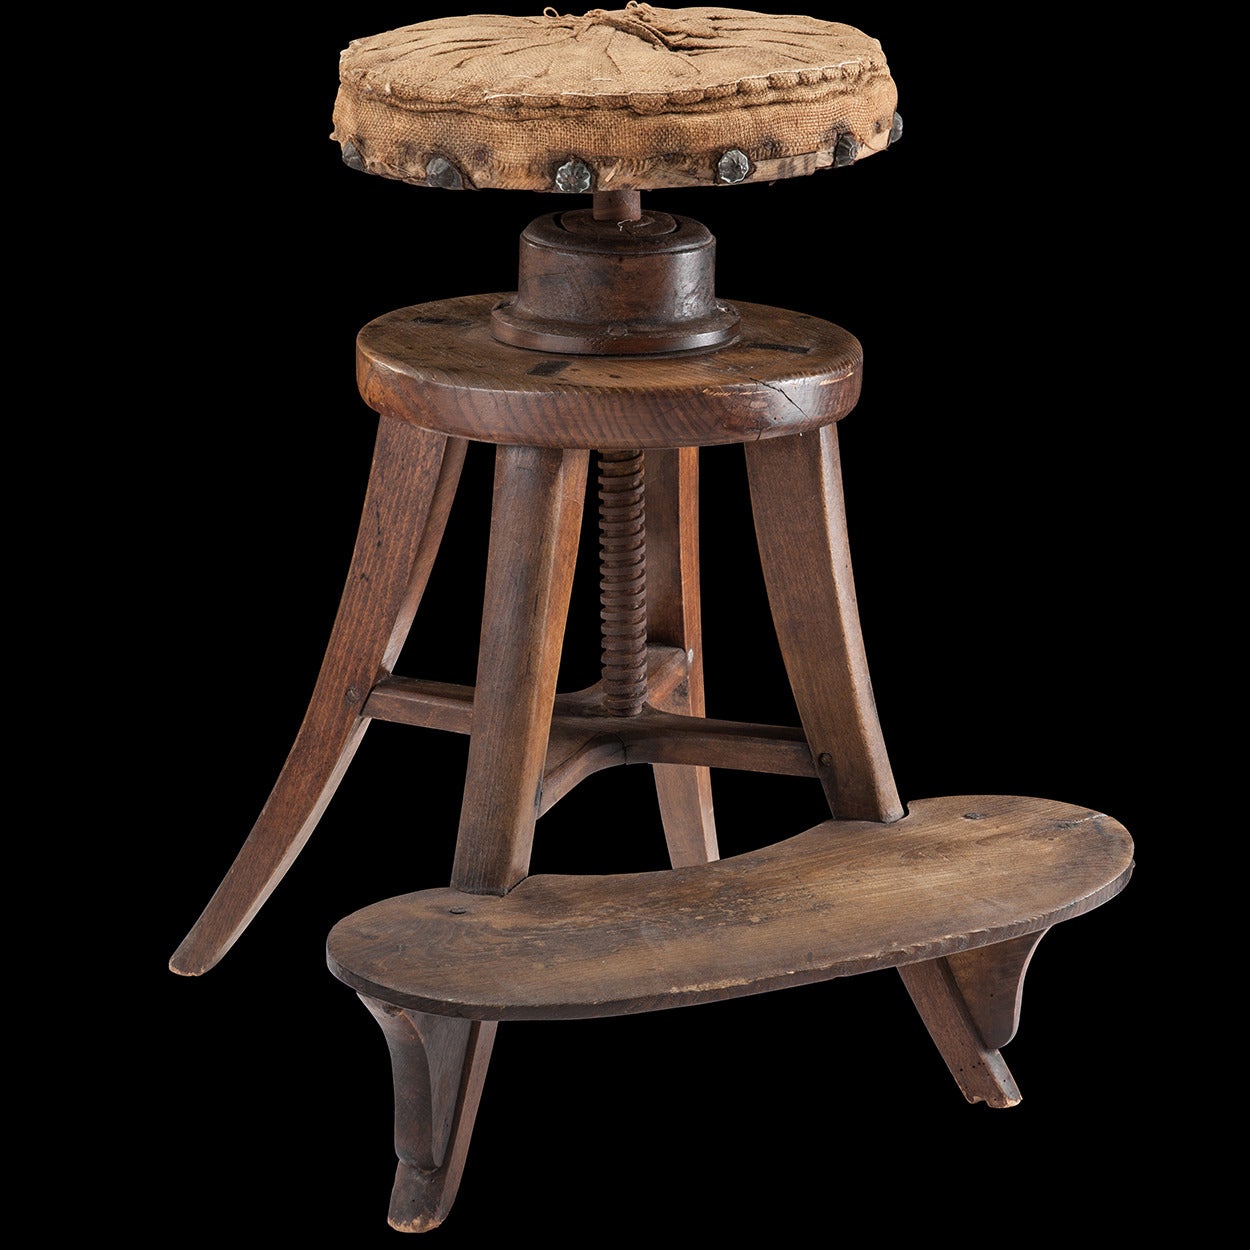 Early painter's stool, with adjustable seat heigh. Upholstered in burlap, stuffed with hay and finished with large brass studs.

Made in France circa 1880.